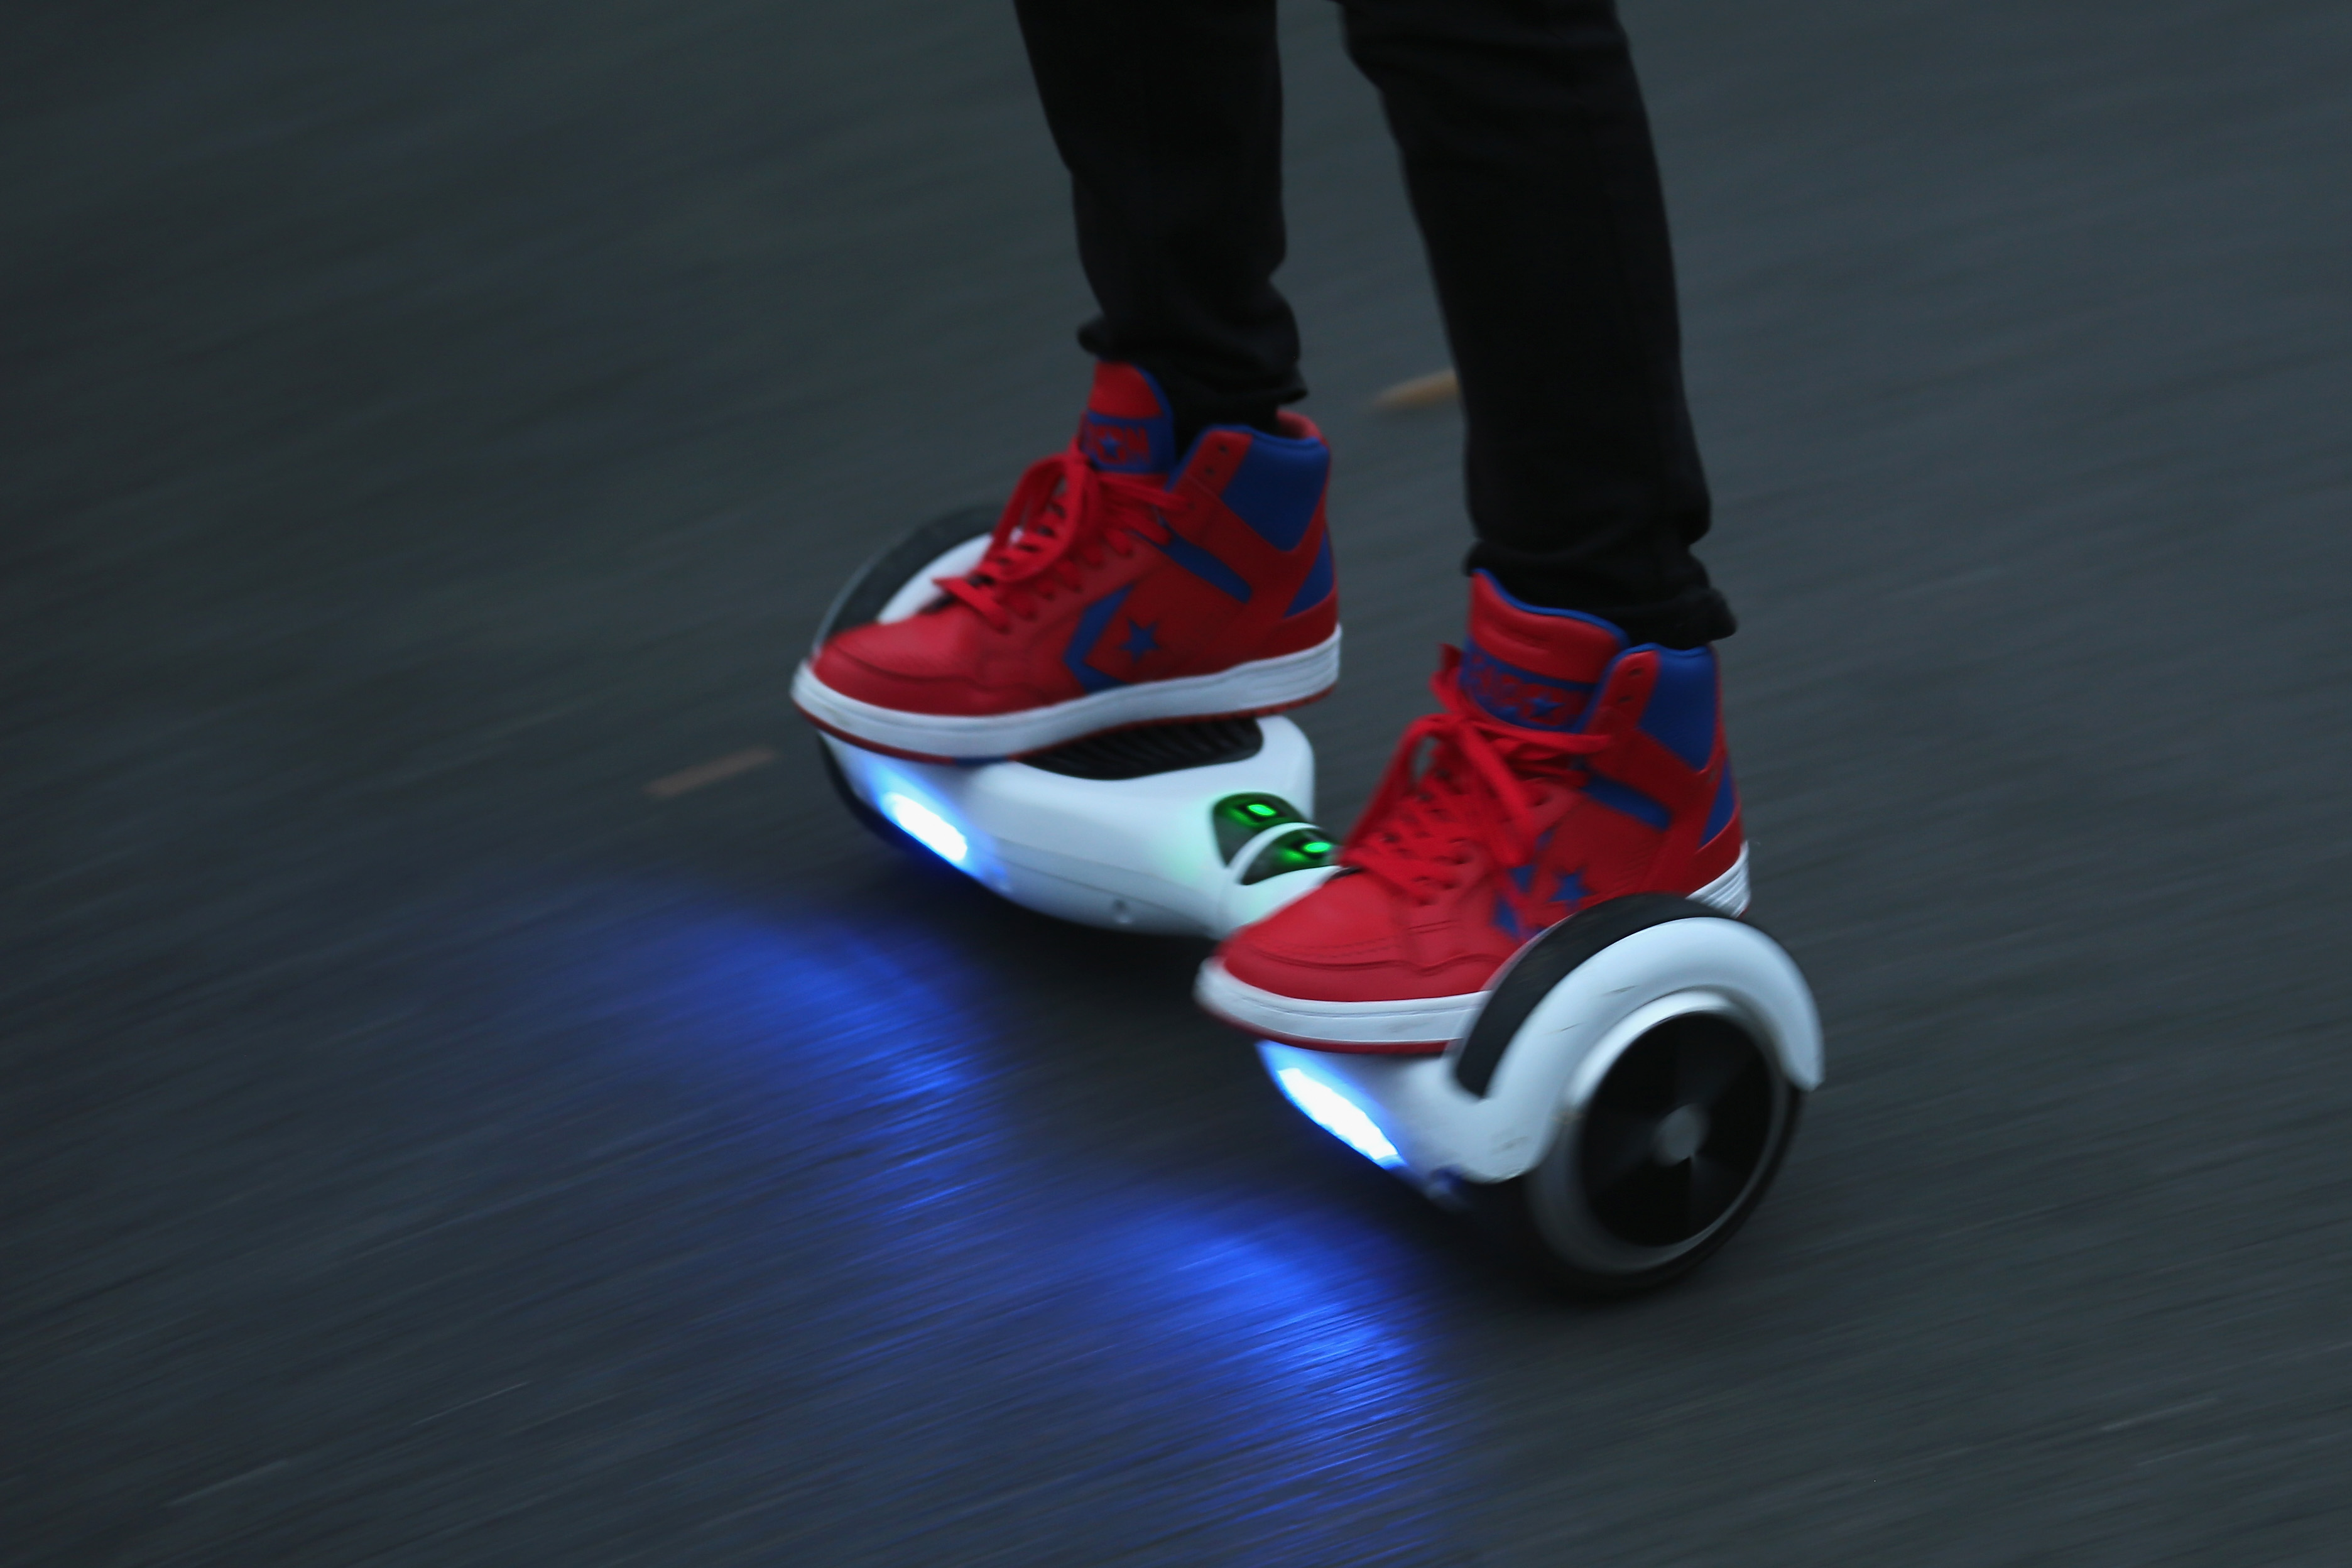 A youth poses as he rides a hoverboard, which are also known as self-balancing scooters and balance boards, on October 13, 2015 in Knutsford, England.
                      The British Crown Prosecution Service have declared that the devices are illegal as they are are too unsafe to ride on the road, and too dangerous to ride on the pavement. (Christopher Furlong— Getty Images)